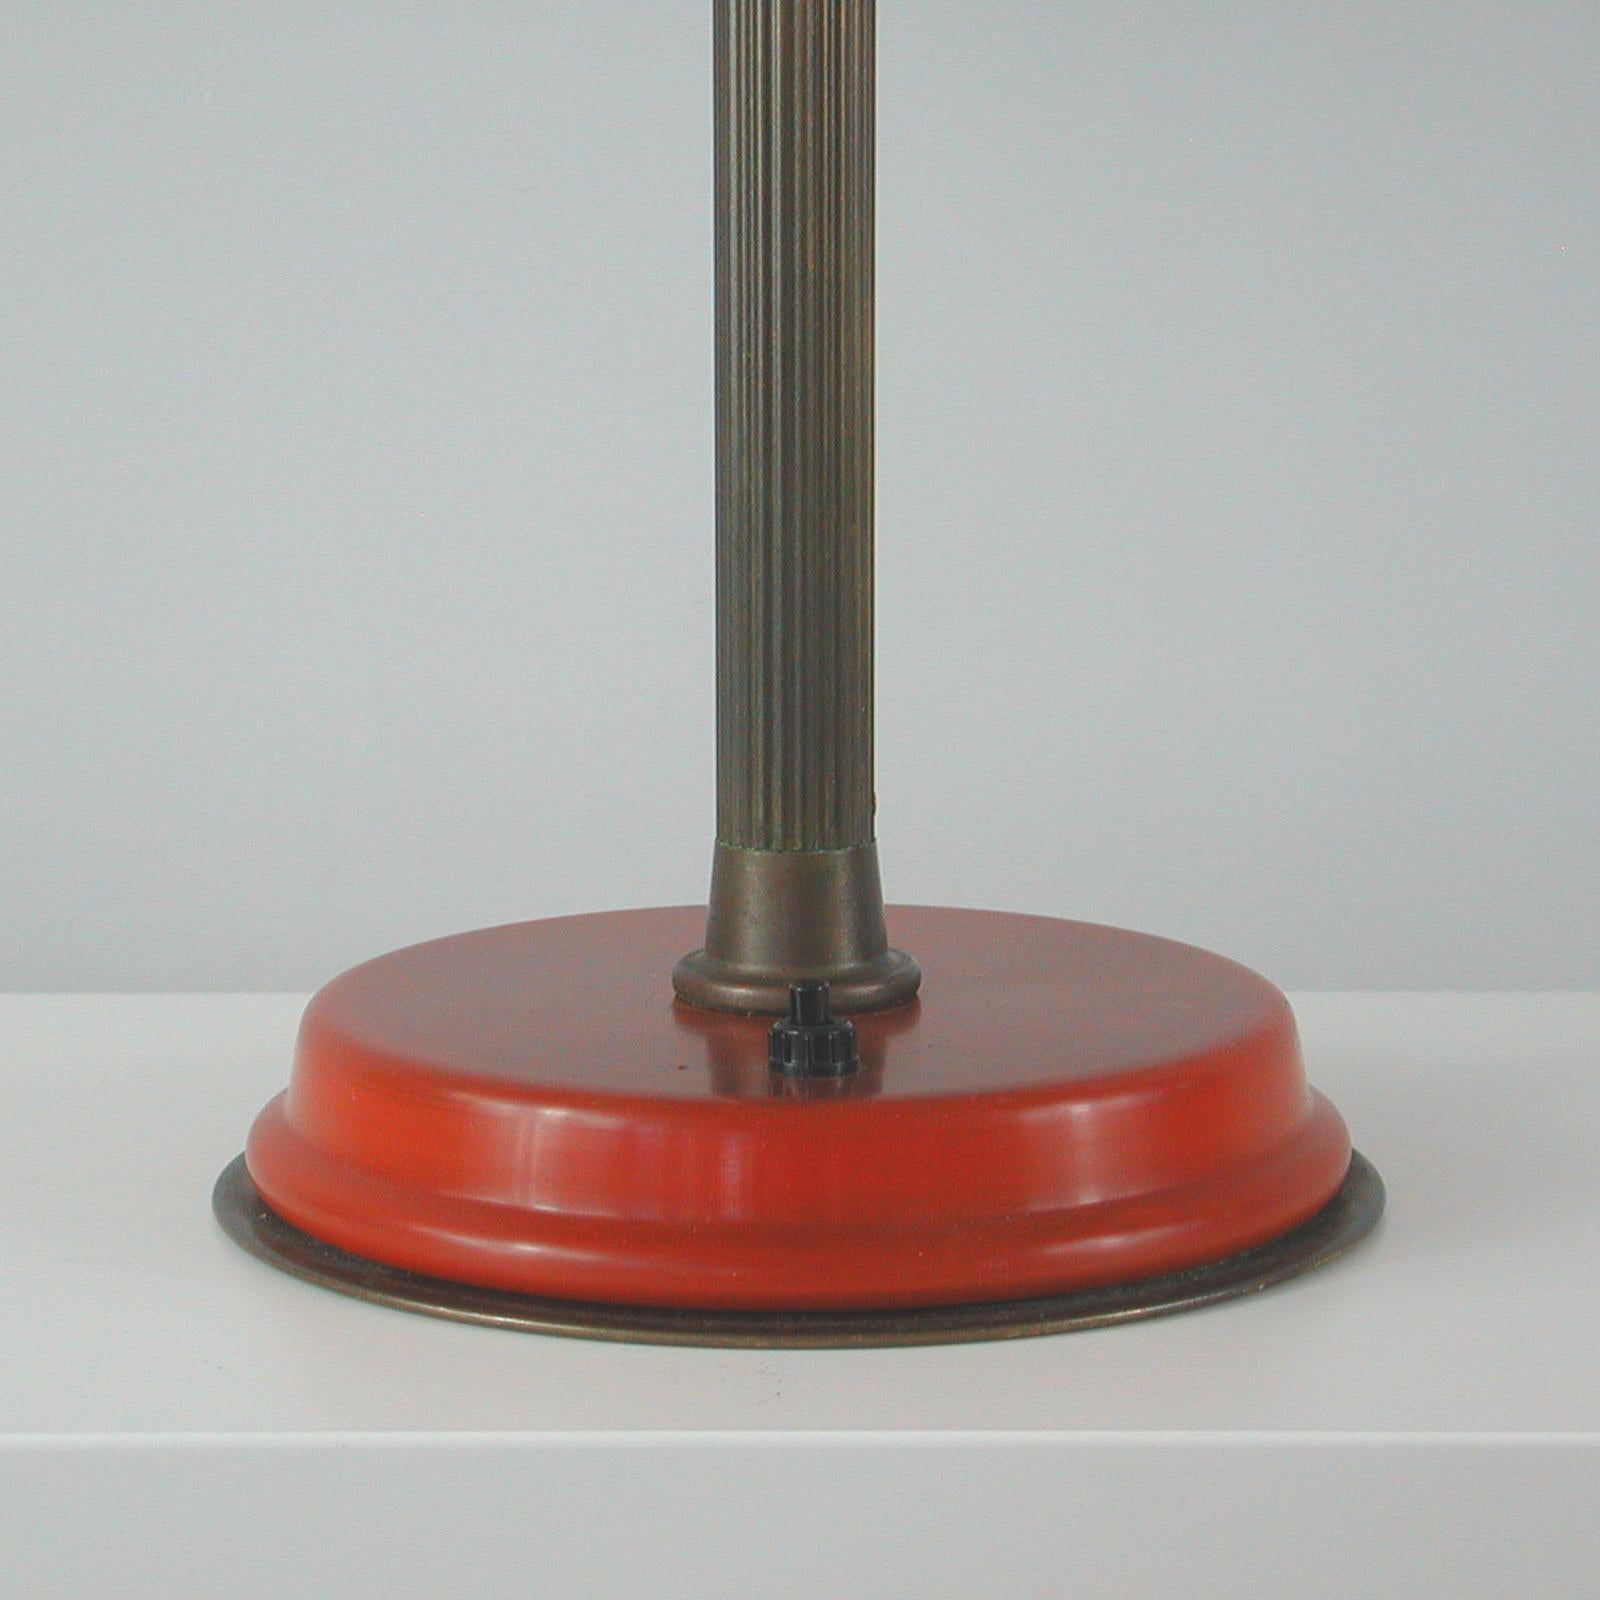 German Art Deco Height Adjustable Bronzed Brass and Bakelite Table Lamp, 1930s For Sale 10